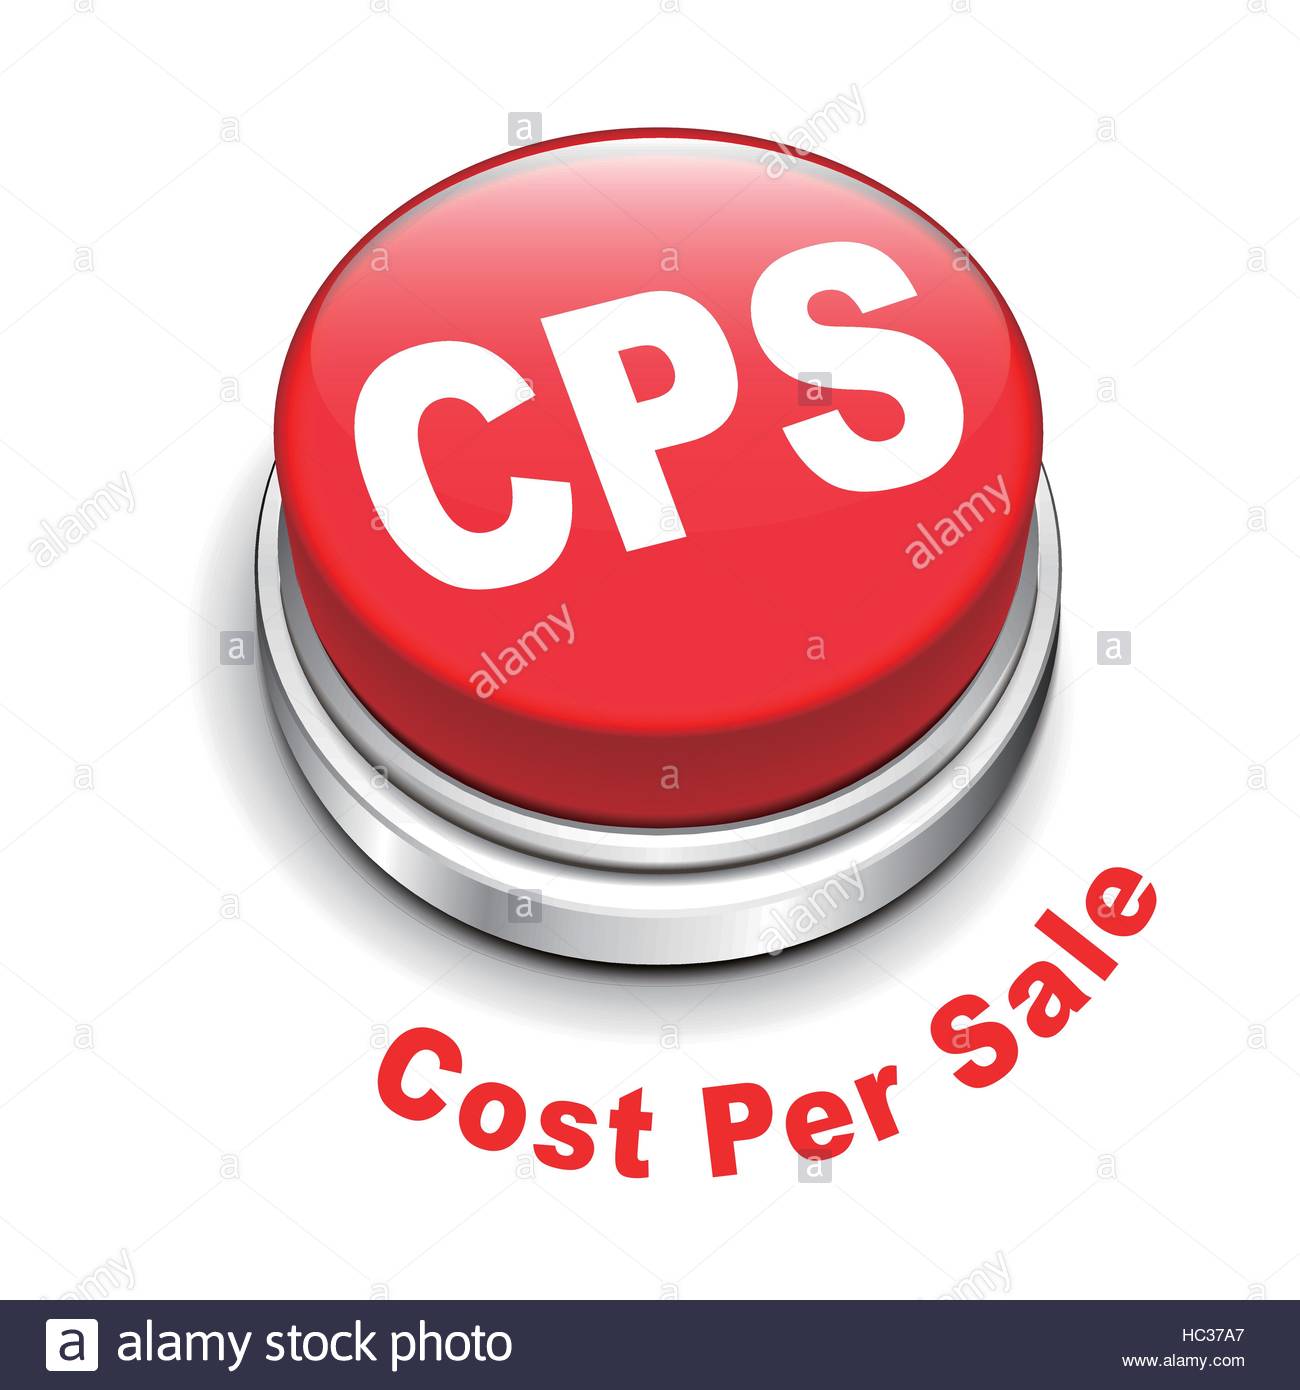 3d Illustration Of Cps Cost Per Sale Button Isolated White